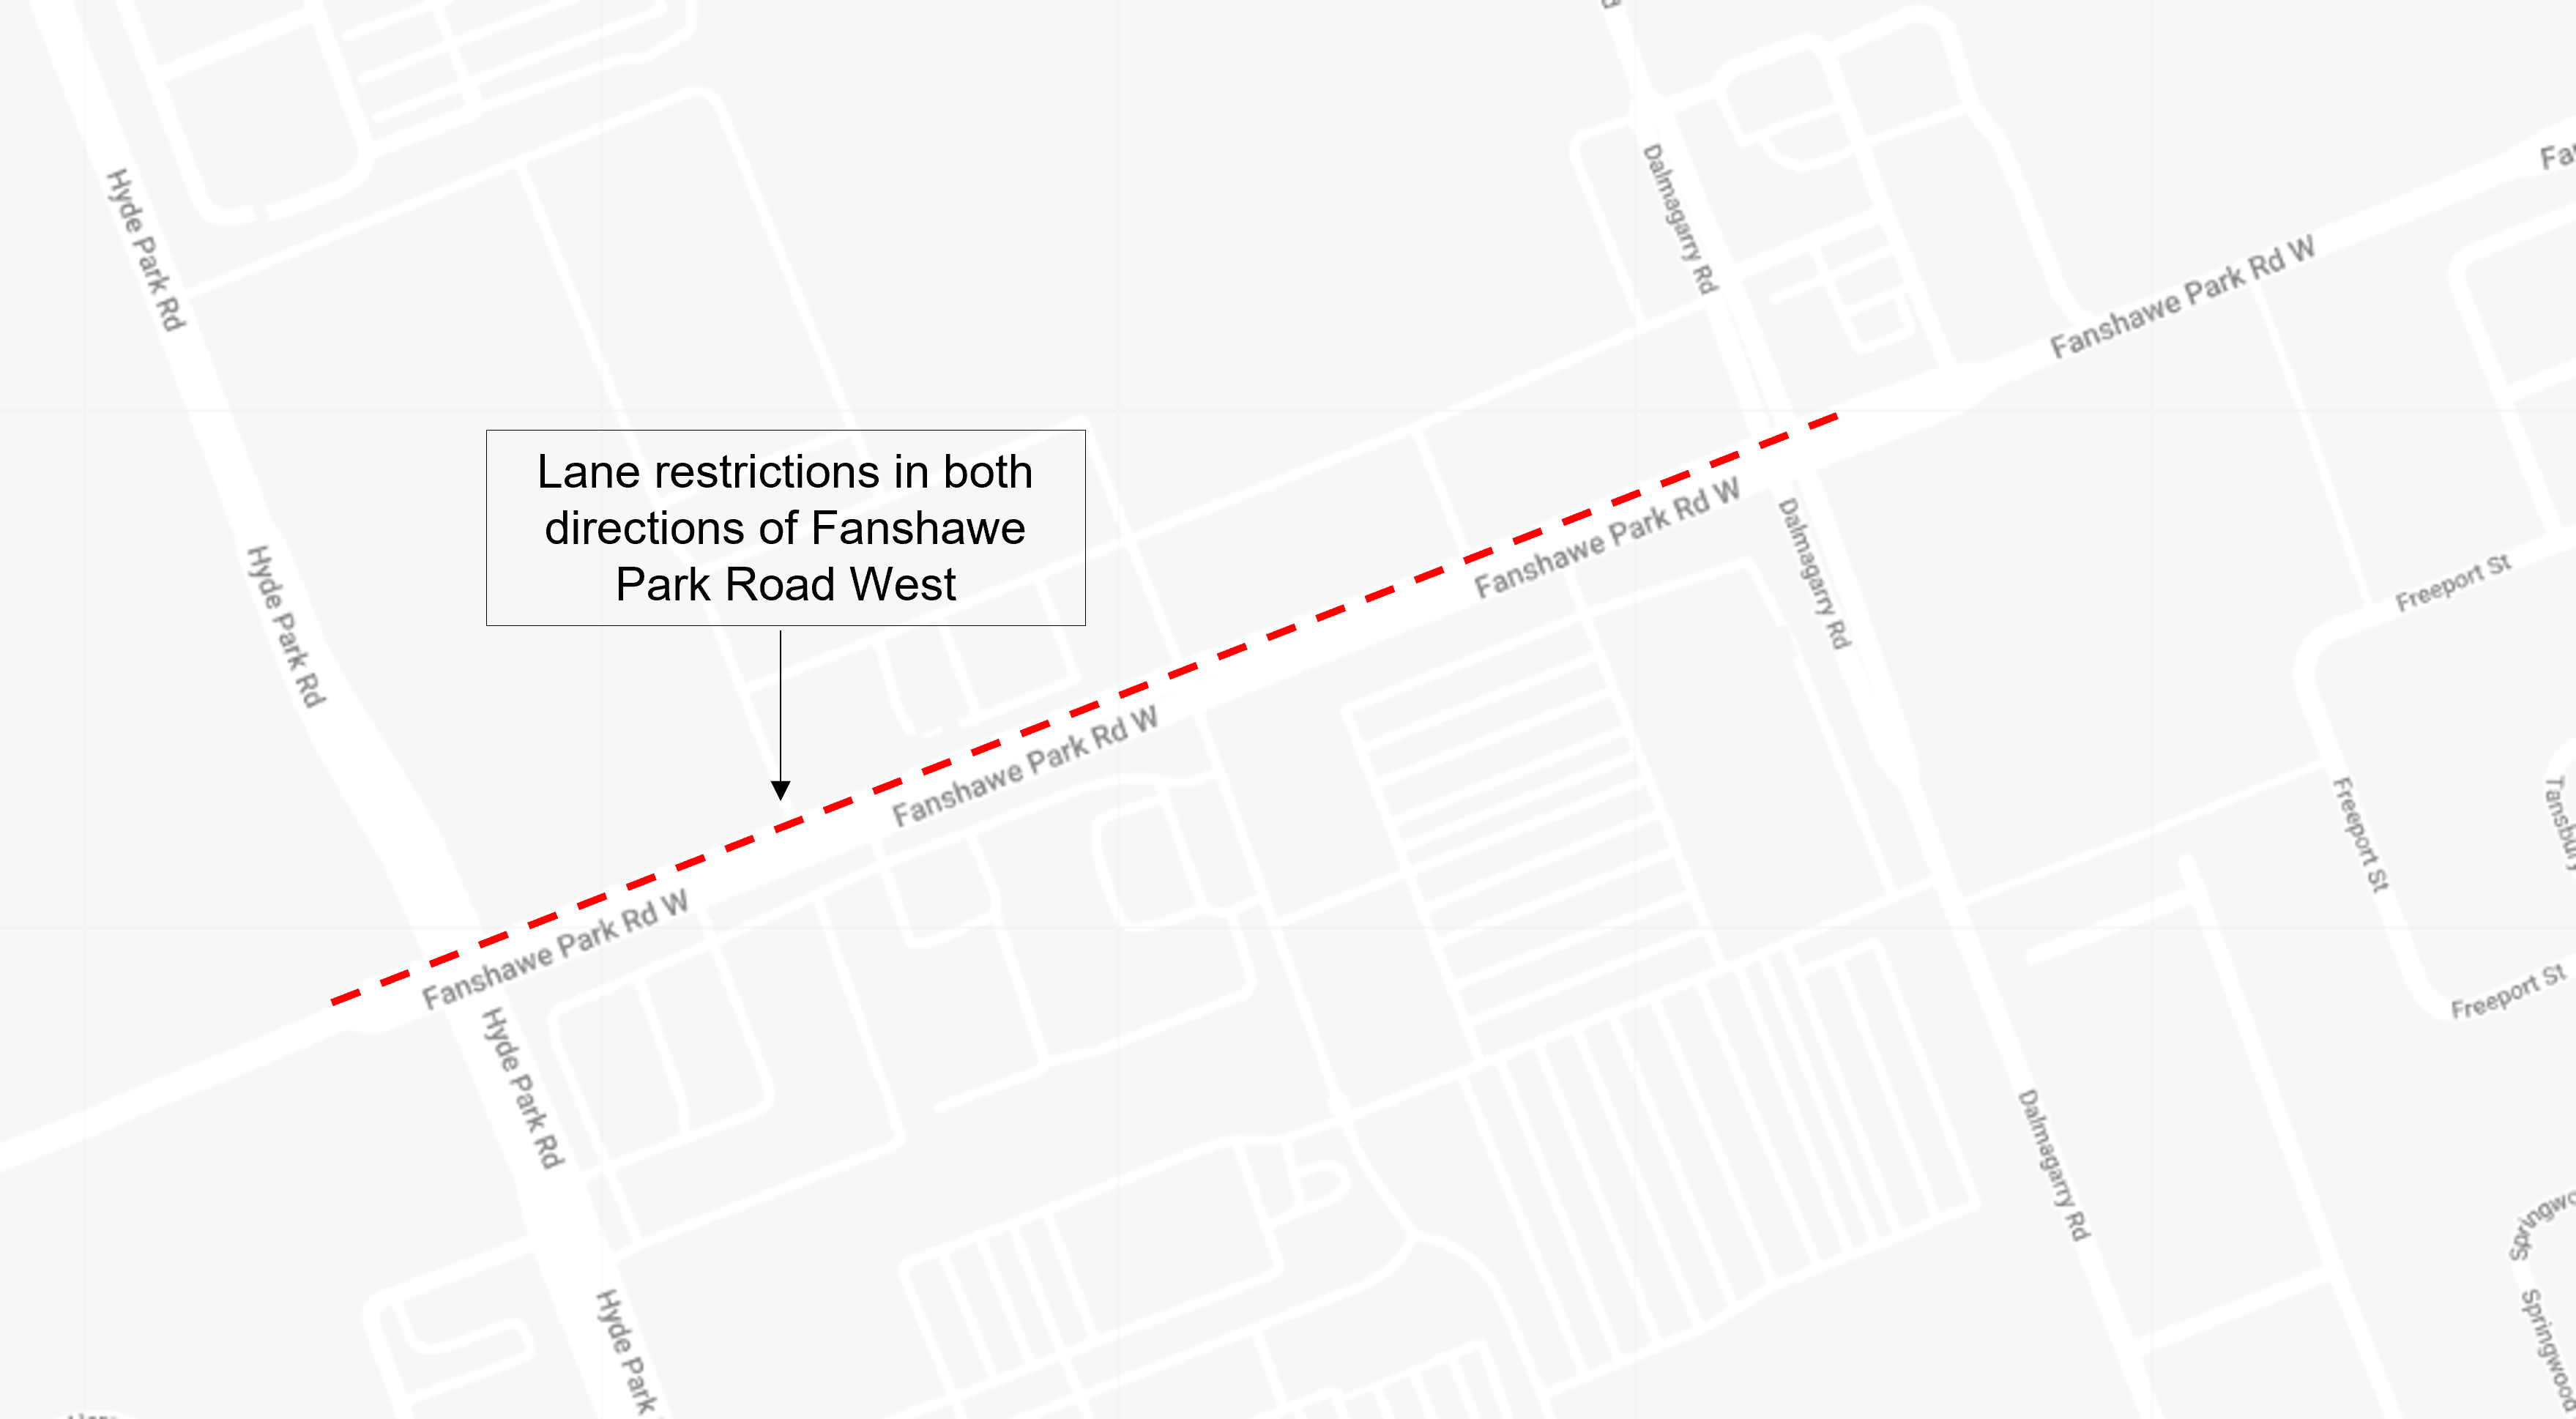 Above: A map of the Fanshawe Park Road West lane restrictions from west of Hyde Park Road to east of Dalmagarry Road.